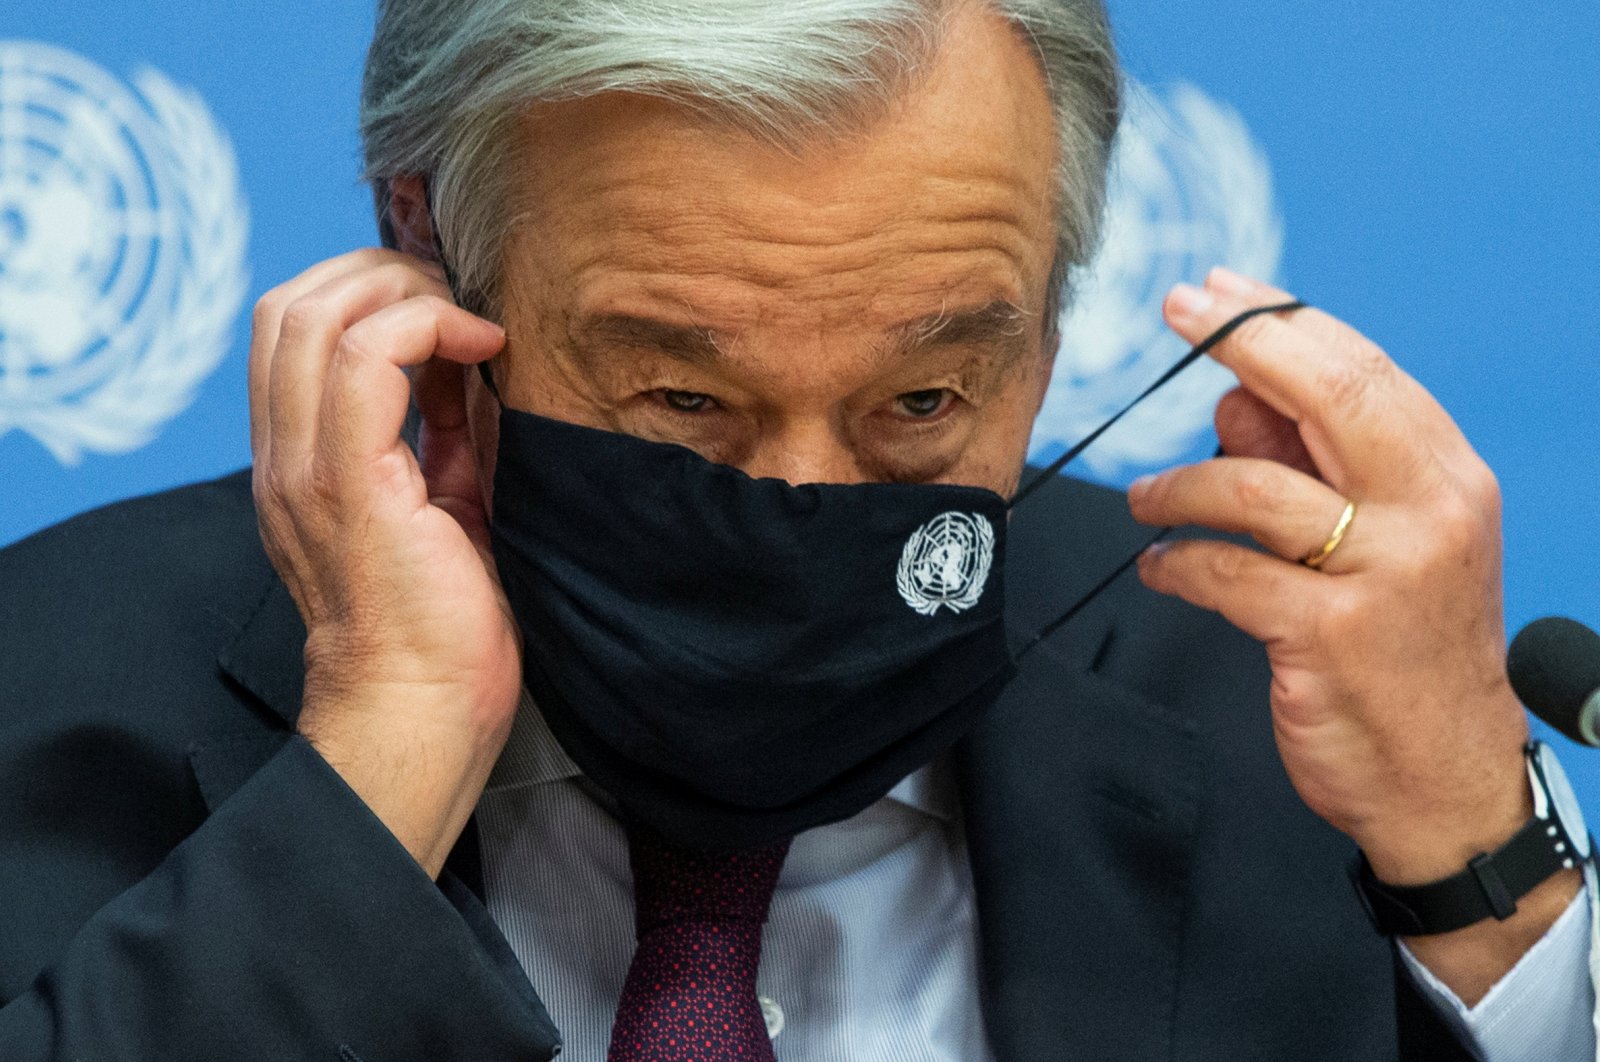 United Nations Secretary-General Antonio Guterres adjusts his mask before leaving a news conference at U.N. headquarters in New York City, New York, U.S., Nov. 20, 2020. (Reuters Photo)